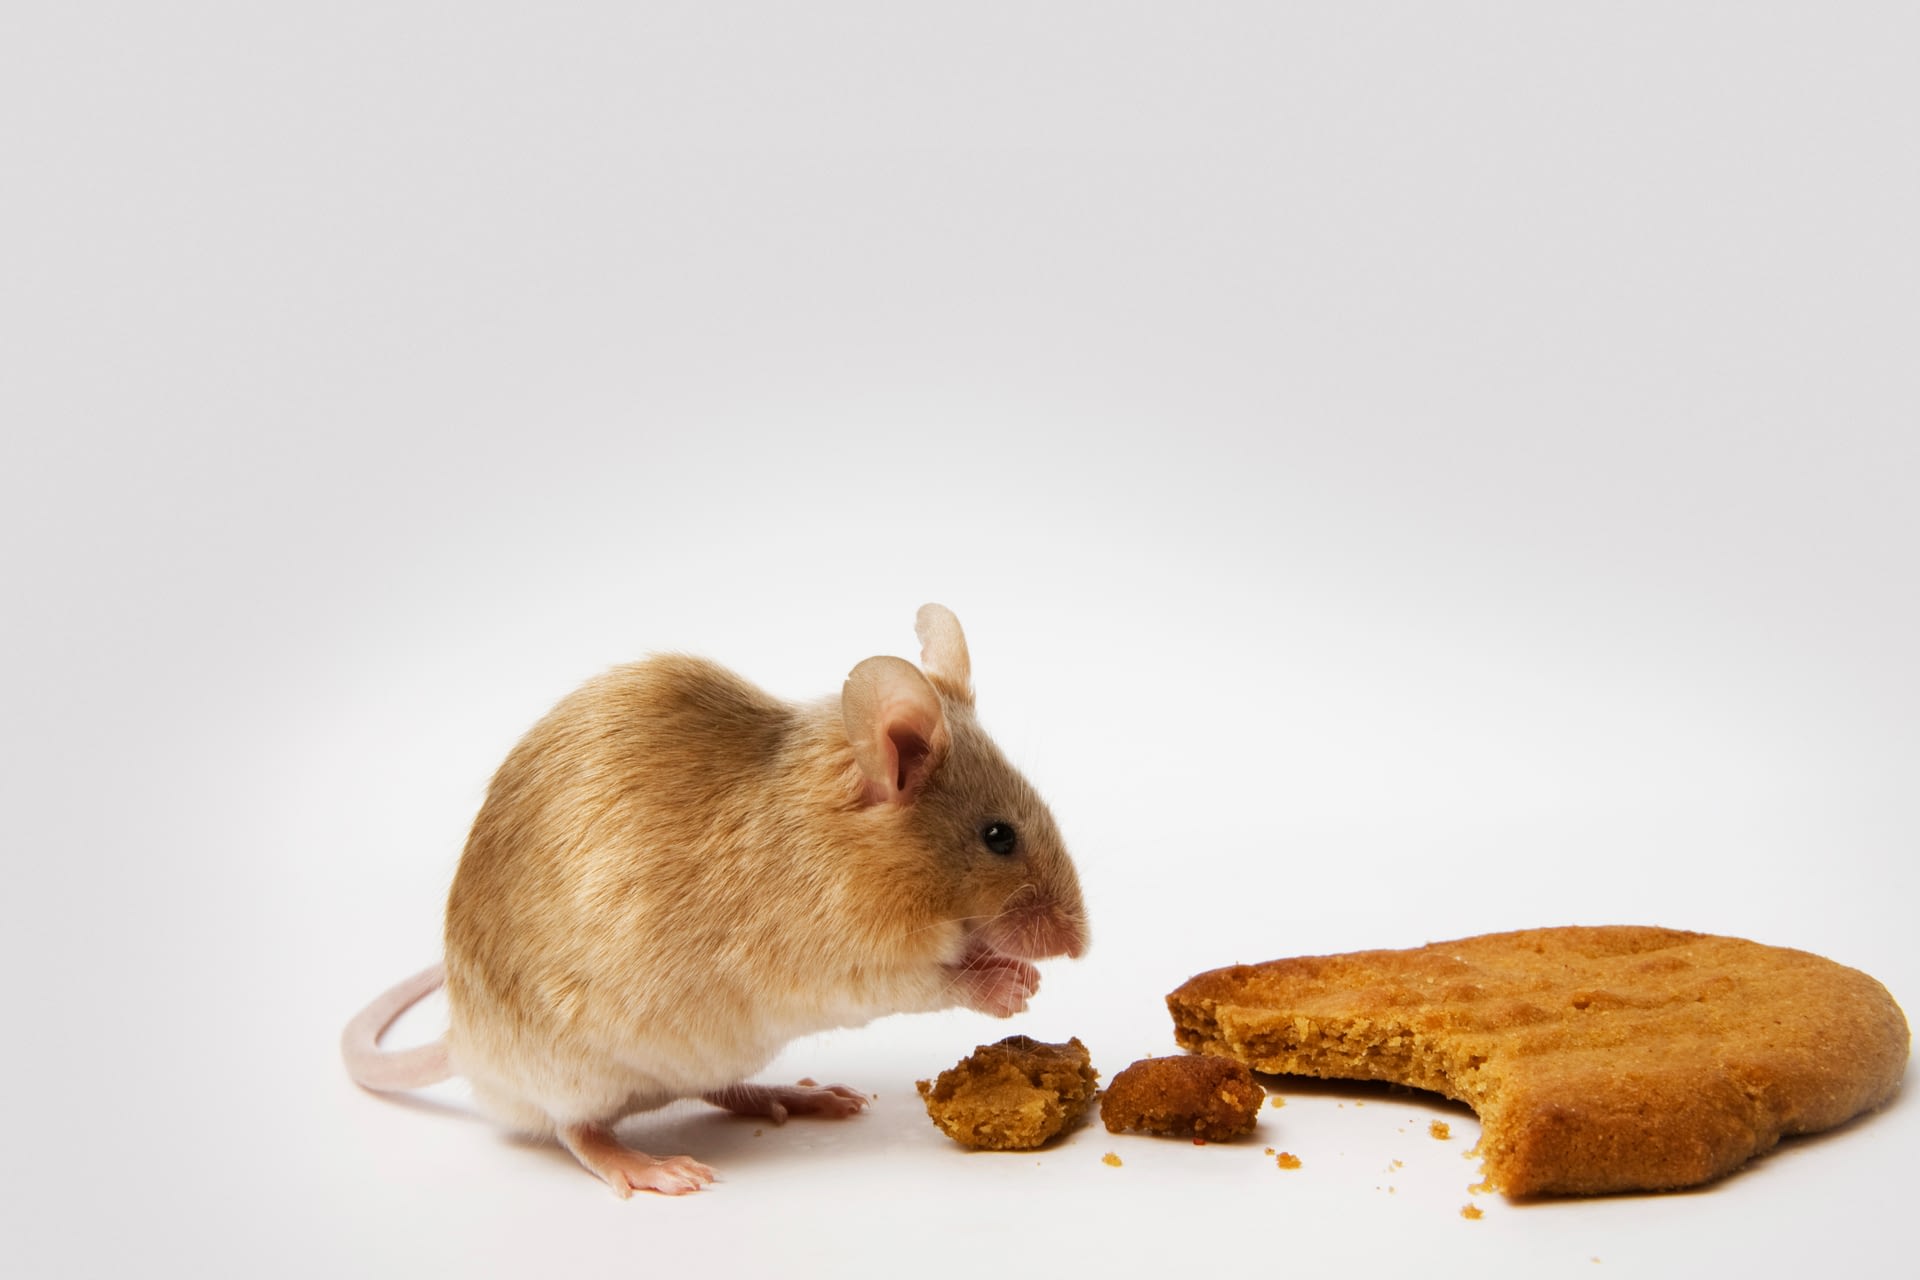 Are mice picky when it comes to food?